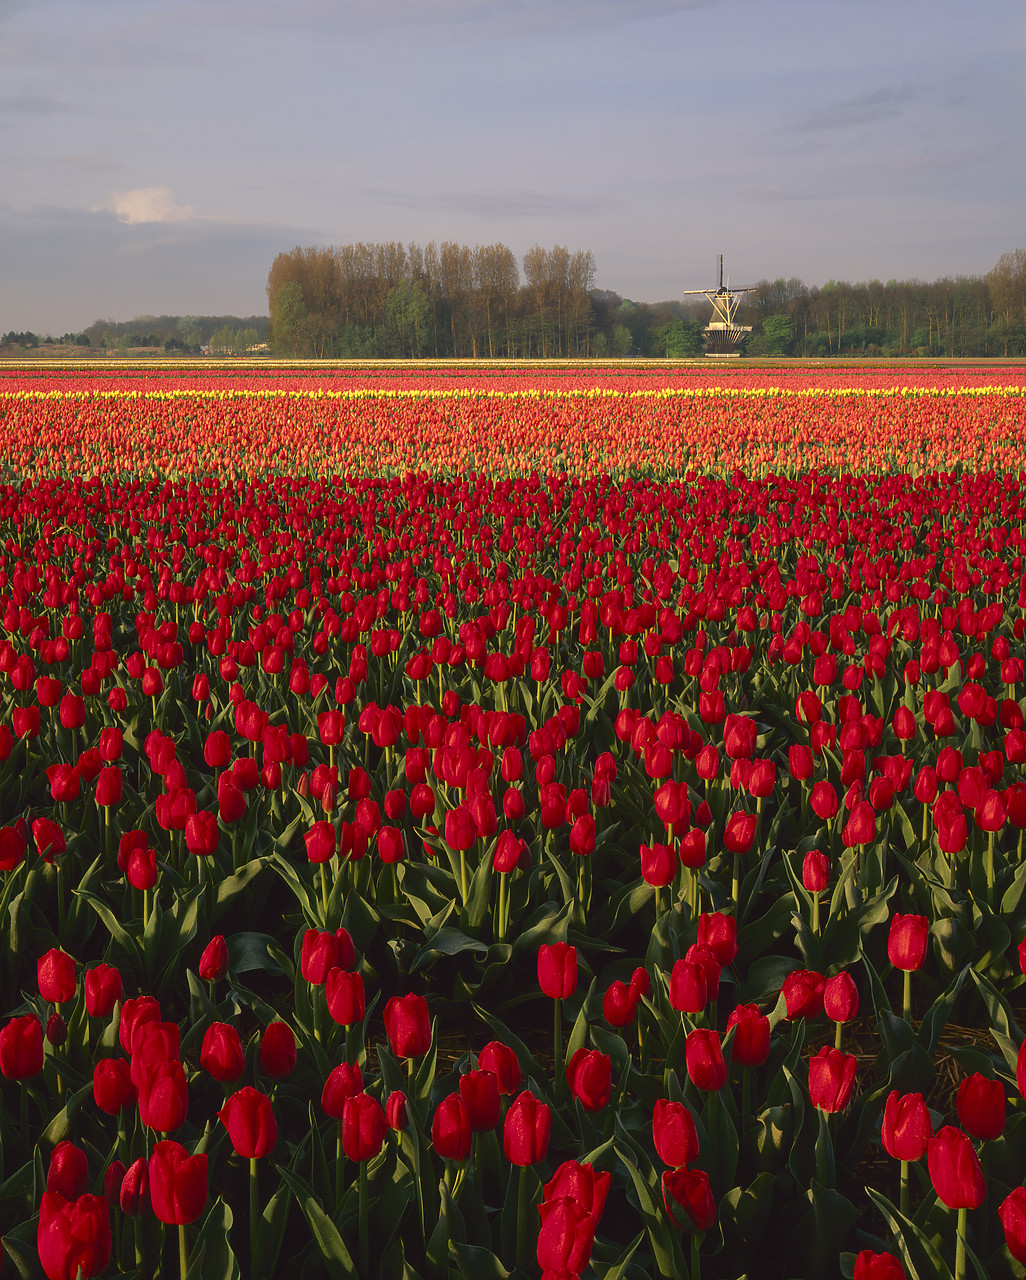 #990316-3 - Field of Tulips & Windmill, Lisse, Holland